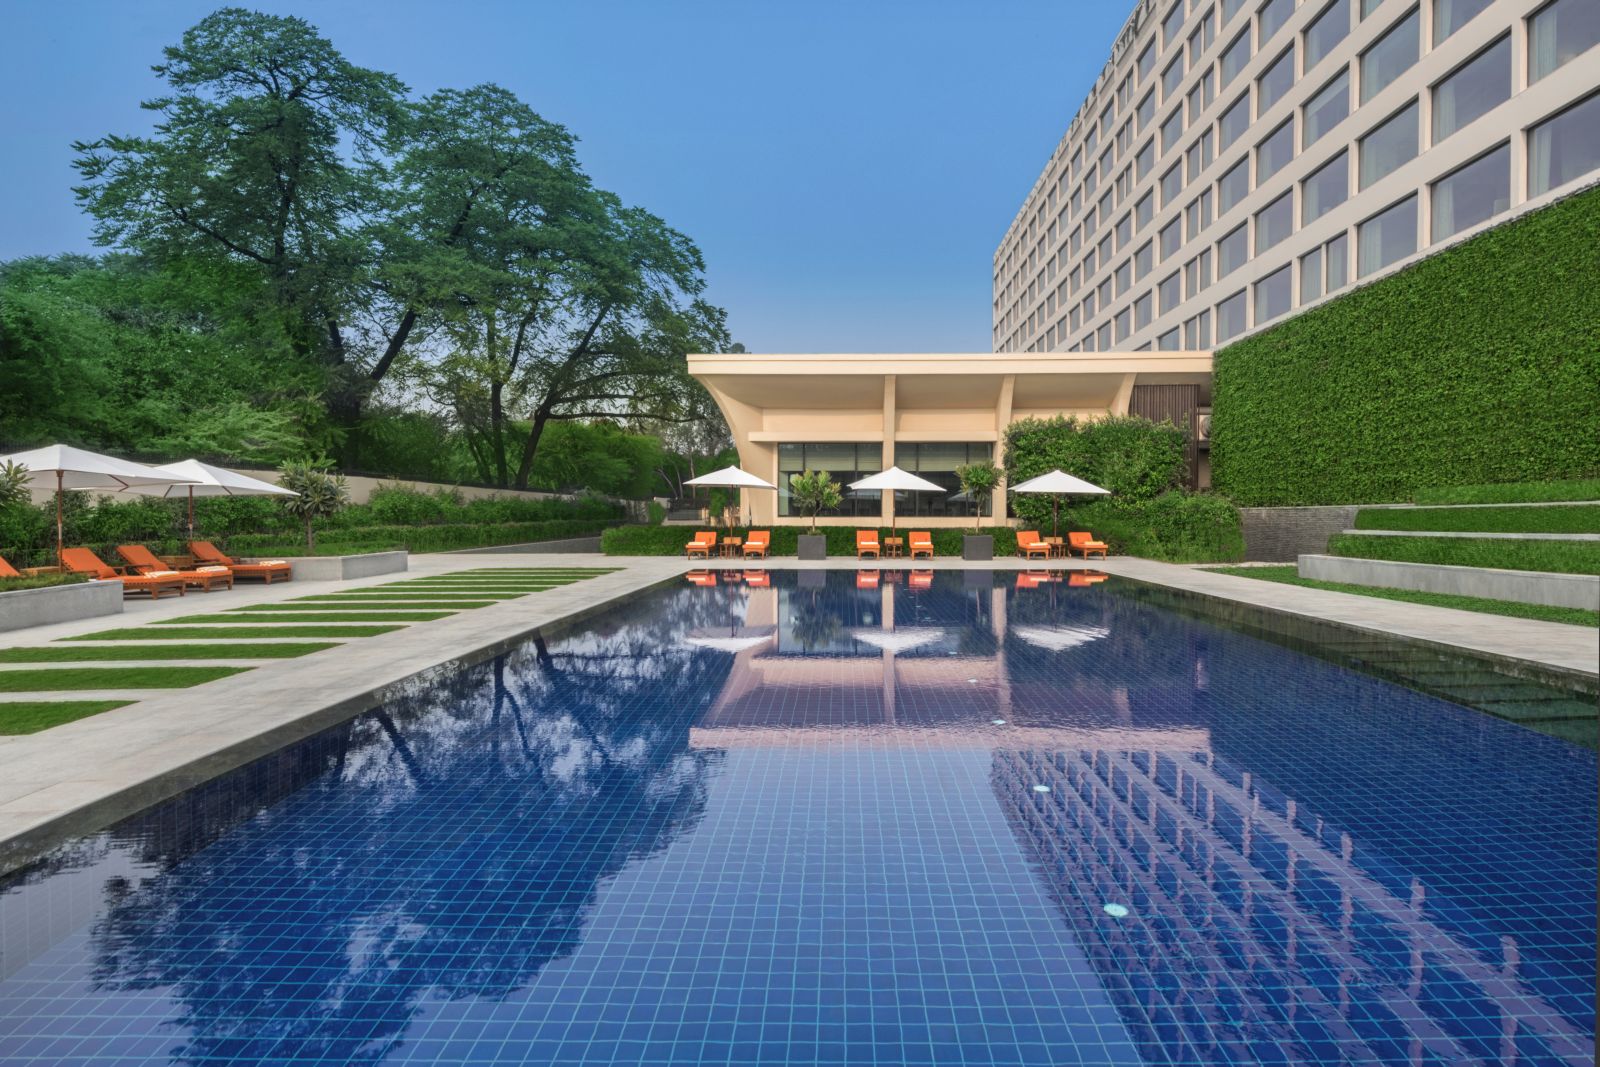 The outdoor swimming pool set in the gardens at the  Oberoi Delhi Hotel in New Dehli